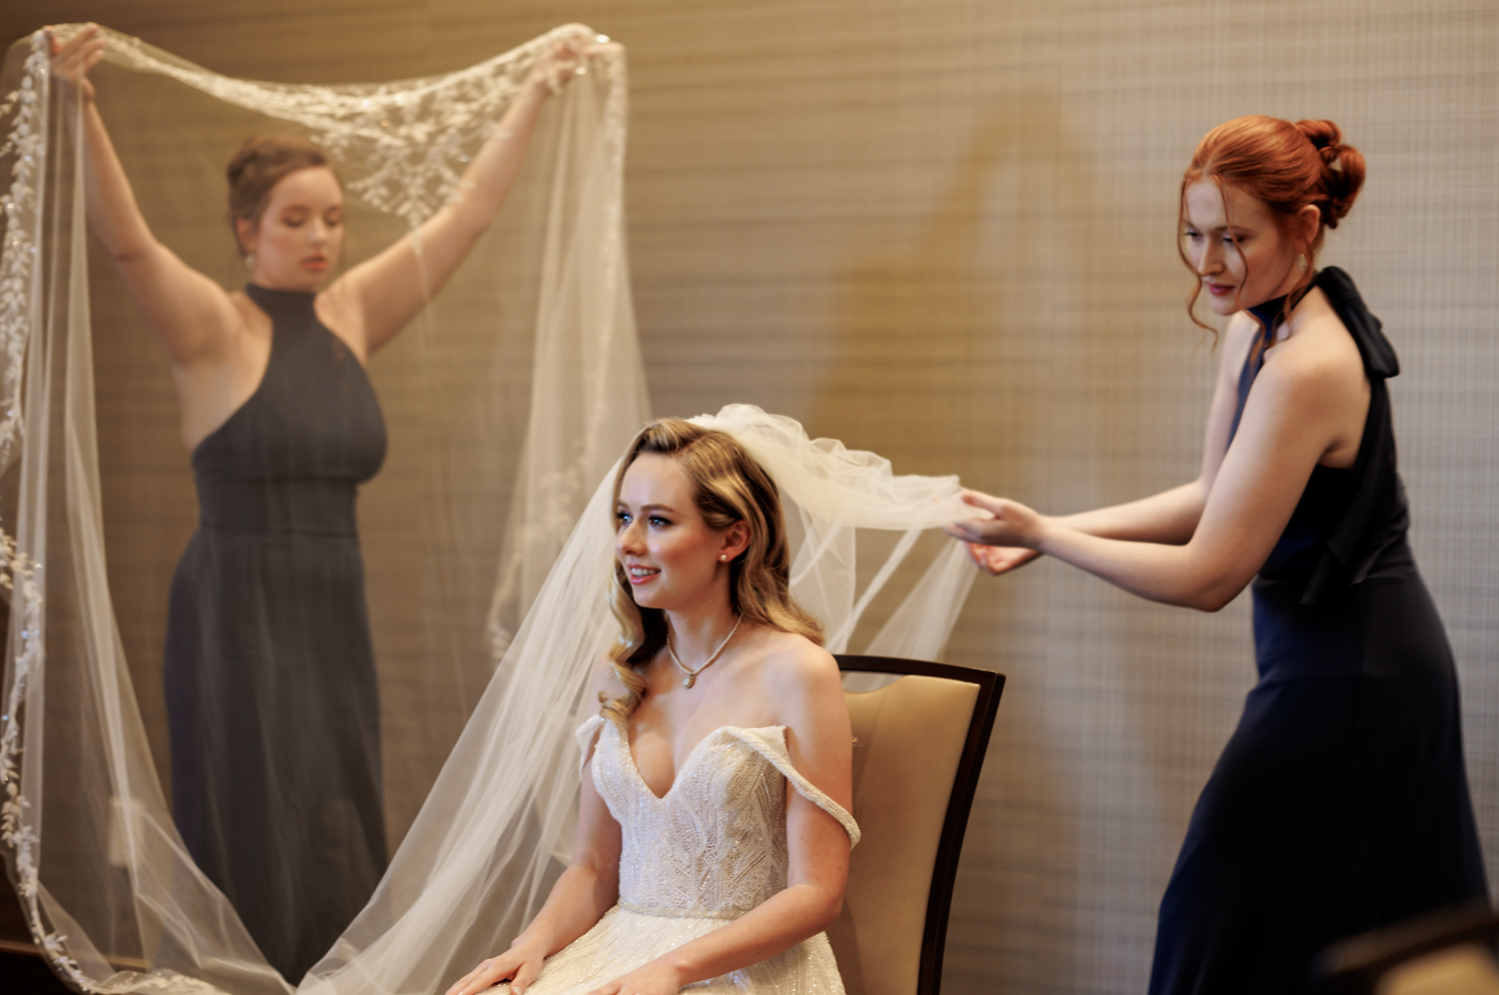 Two bridesmaids fluff the veil and help secure it in the bride's hair